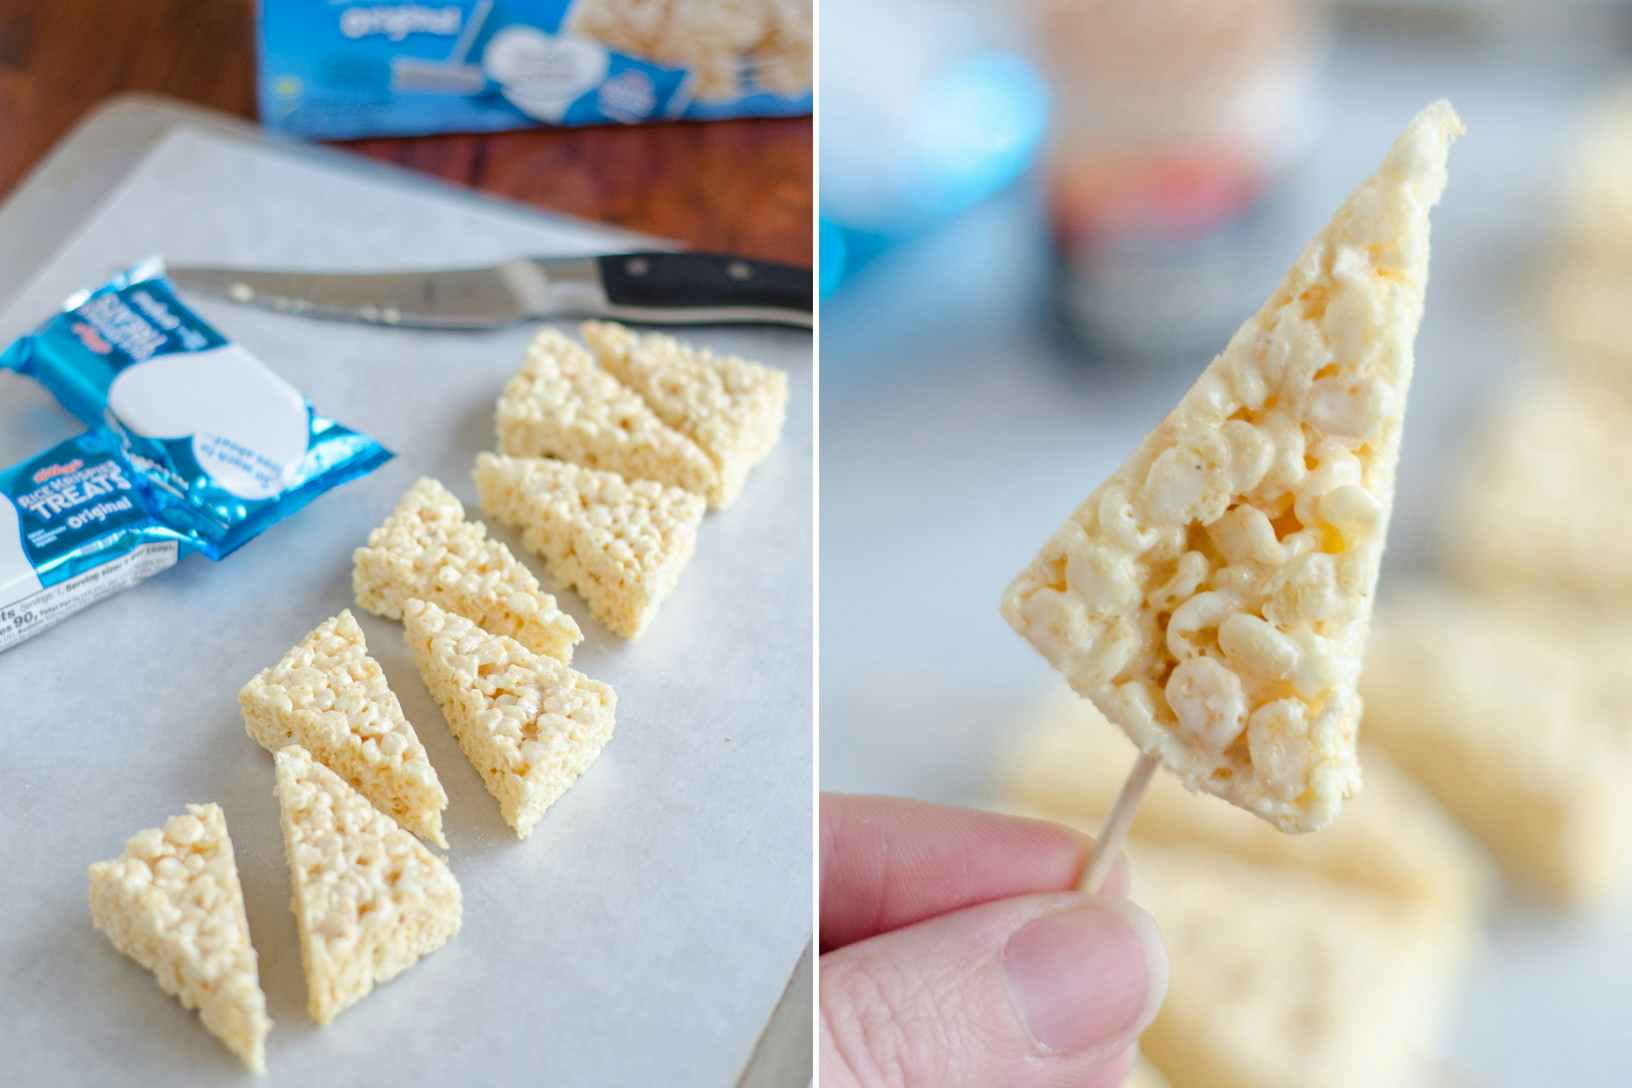 Make Rice Krispies carrots with candy melts and apple sour punch bites.